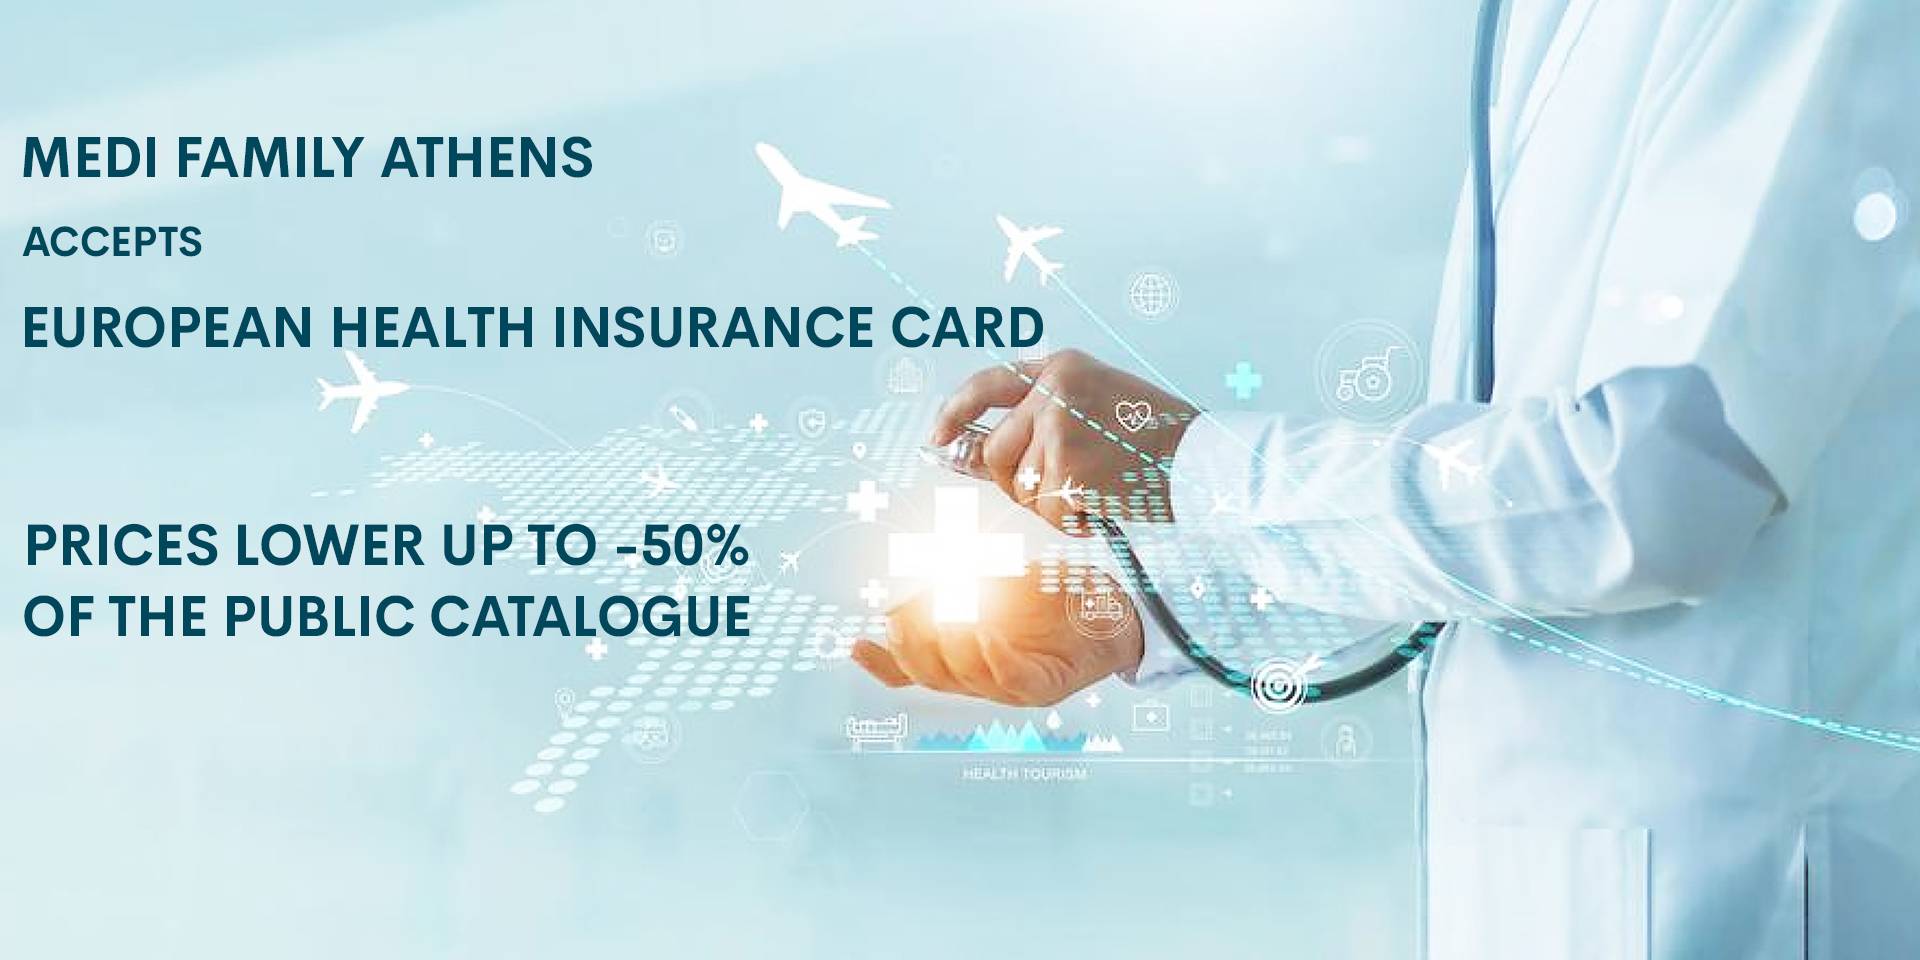 Image informing about the acceptance European Insurance Card